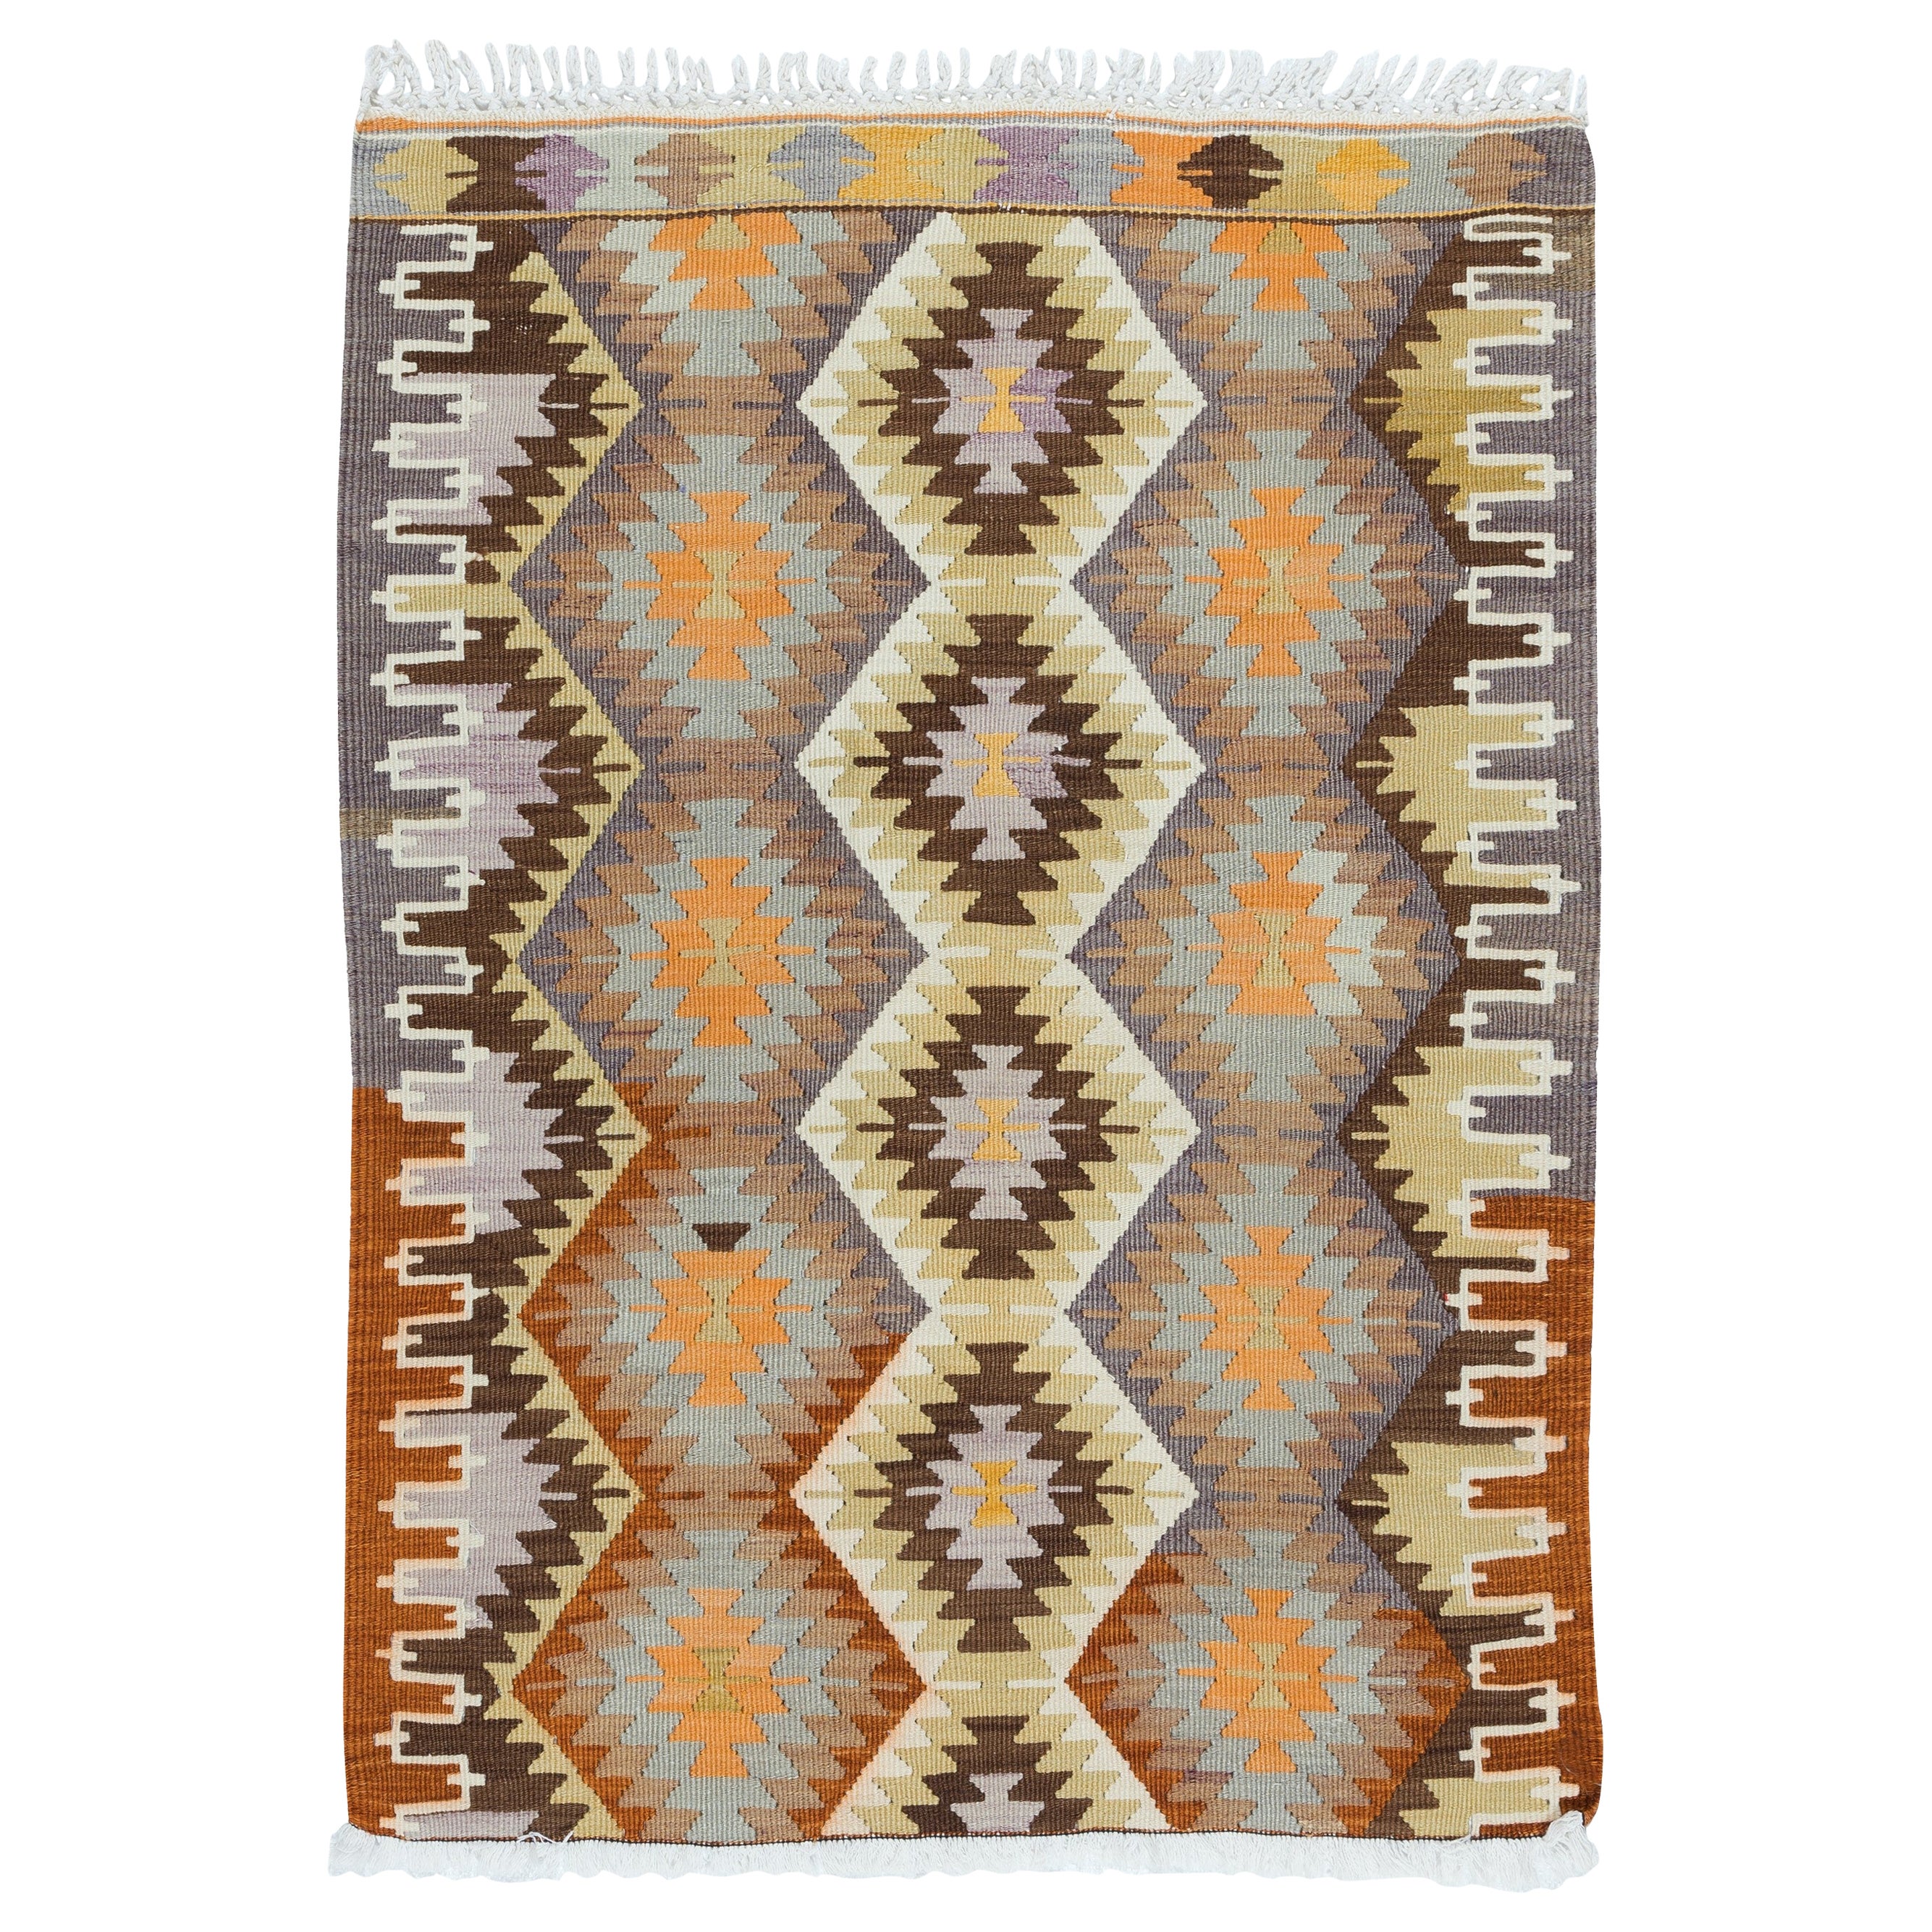 34"x45" Hand-Woven Anatolian Kilim, All Wool, Vintage Multicolor Accent Rug